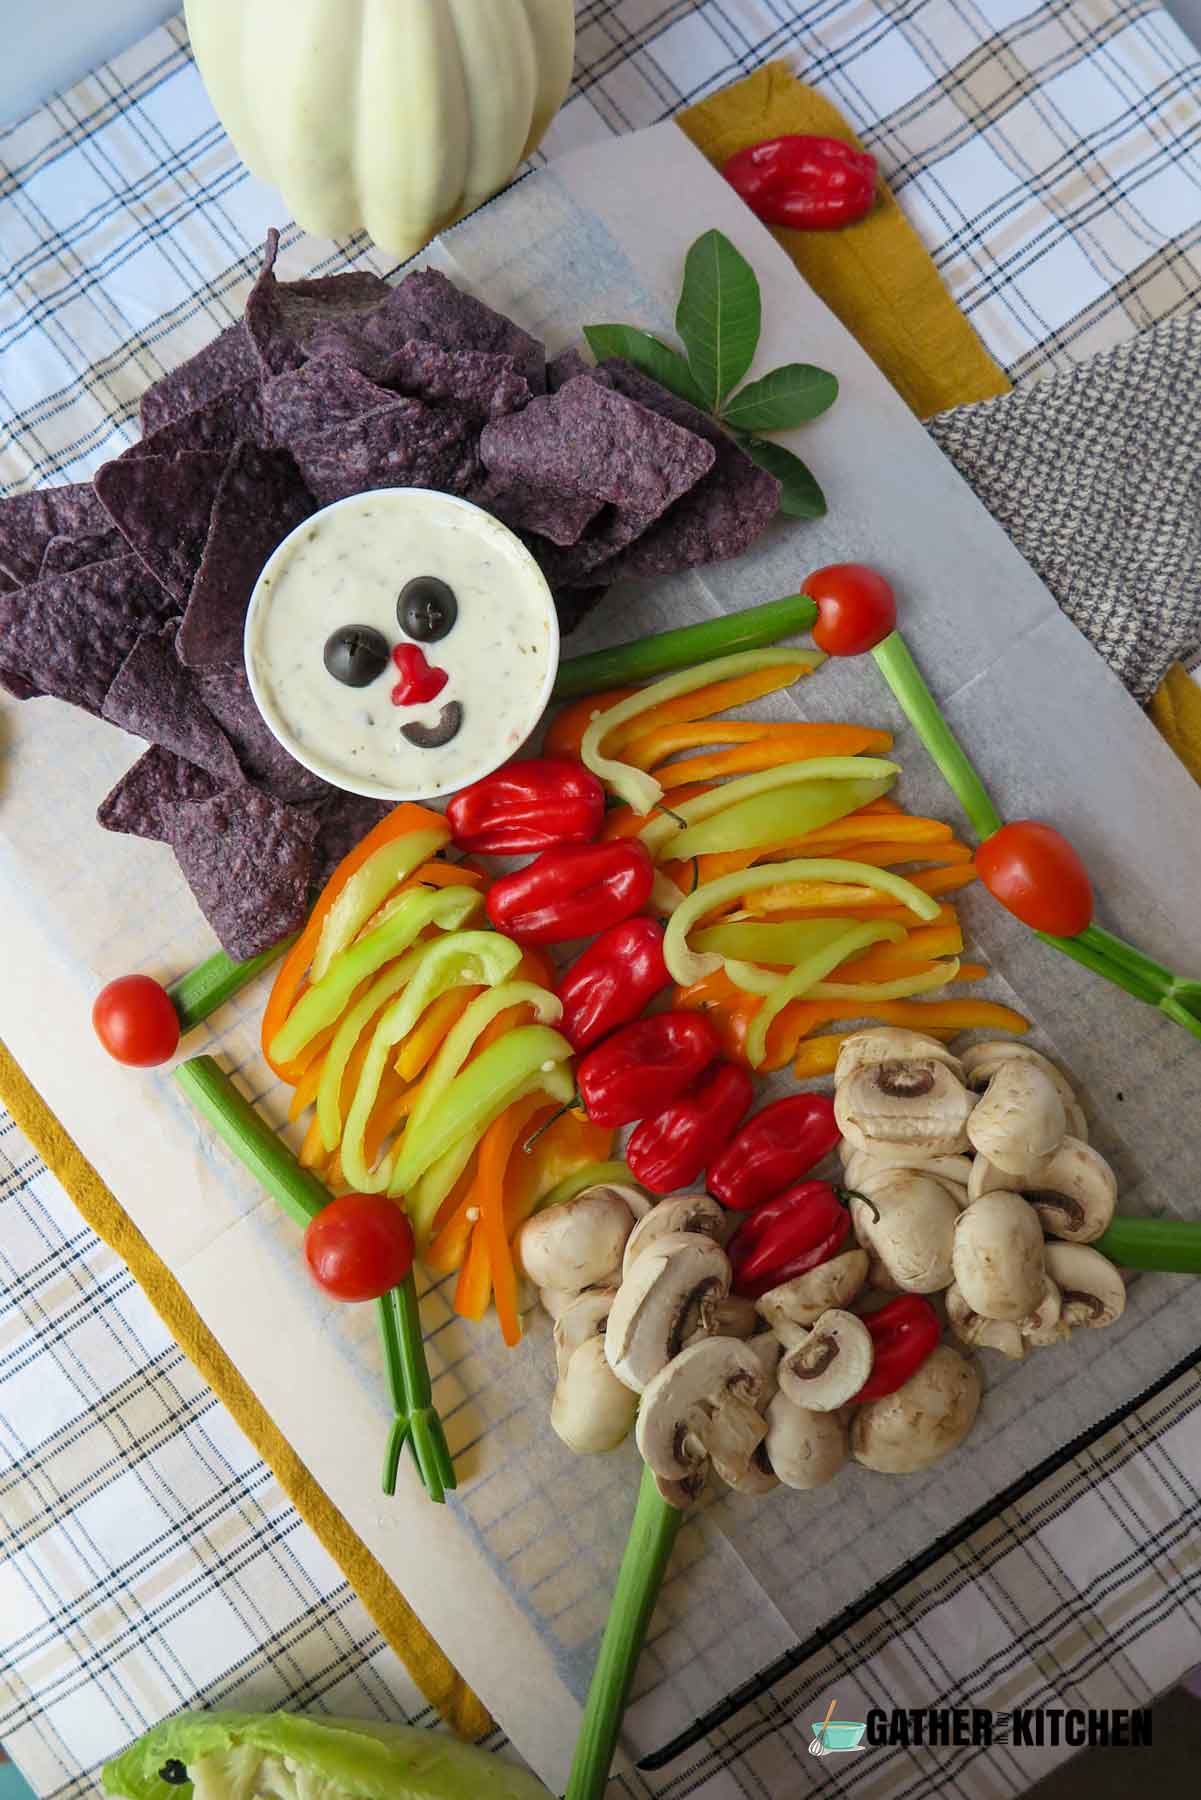 A tray with chips, veggies and a bowl of dip forming a skeleton.